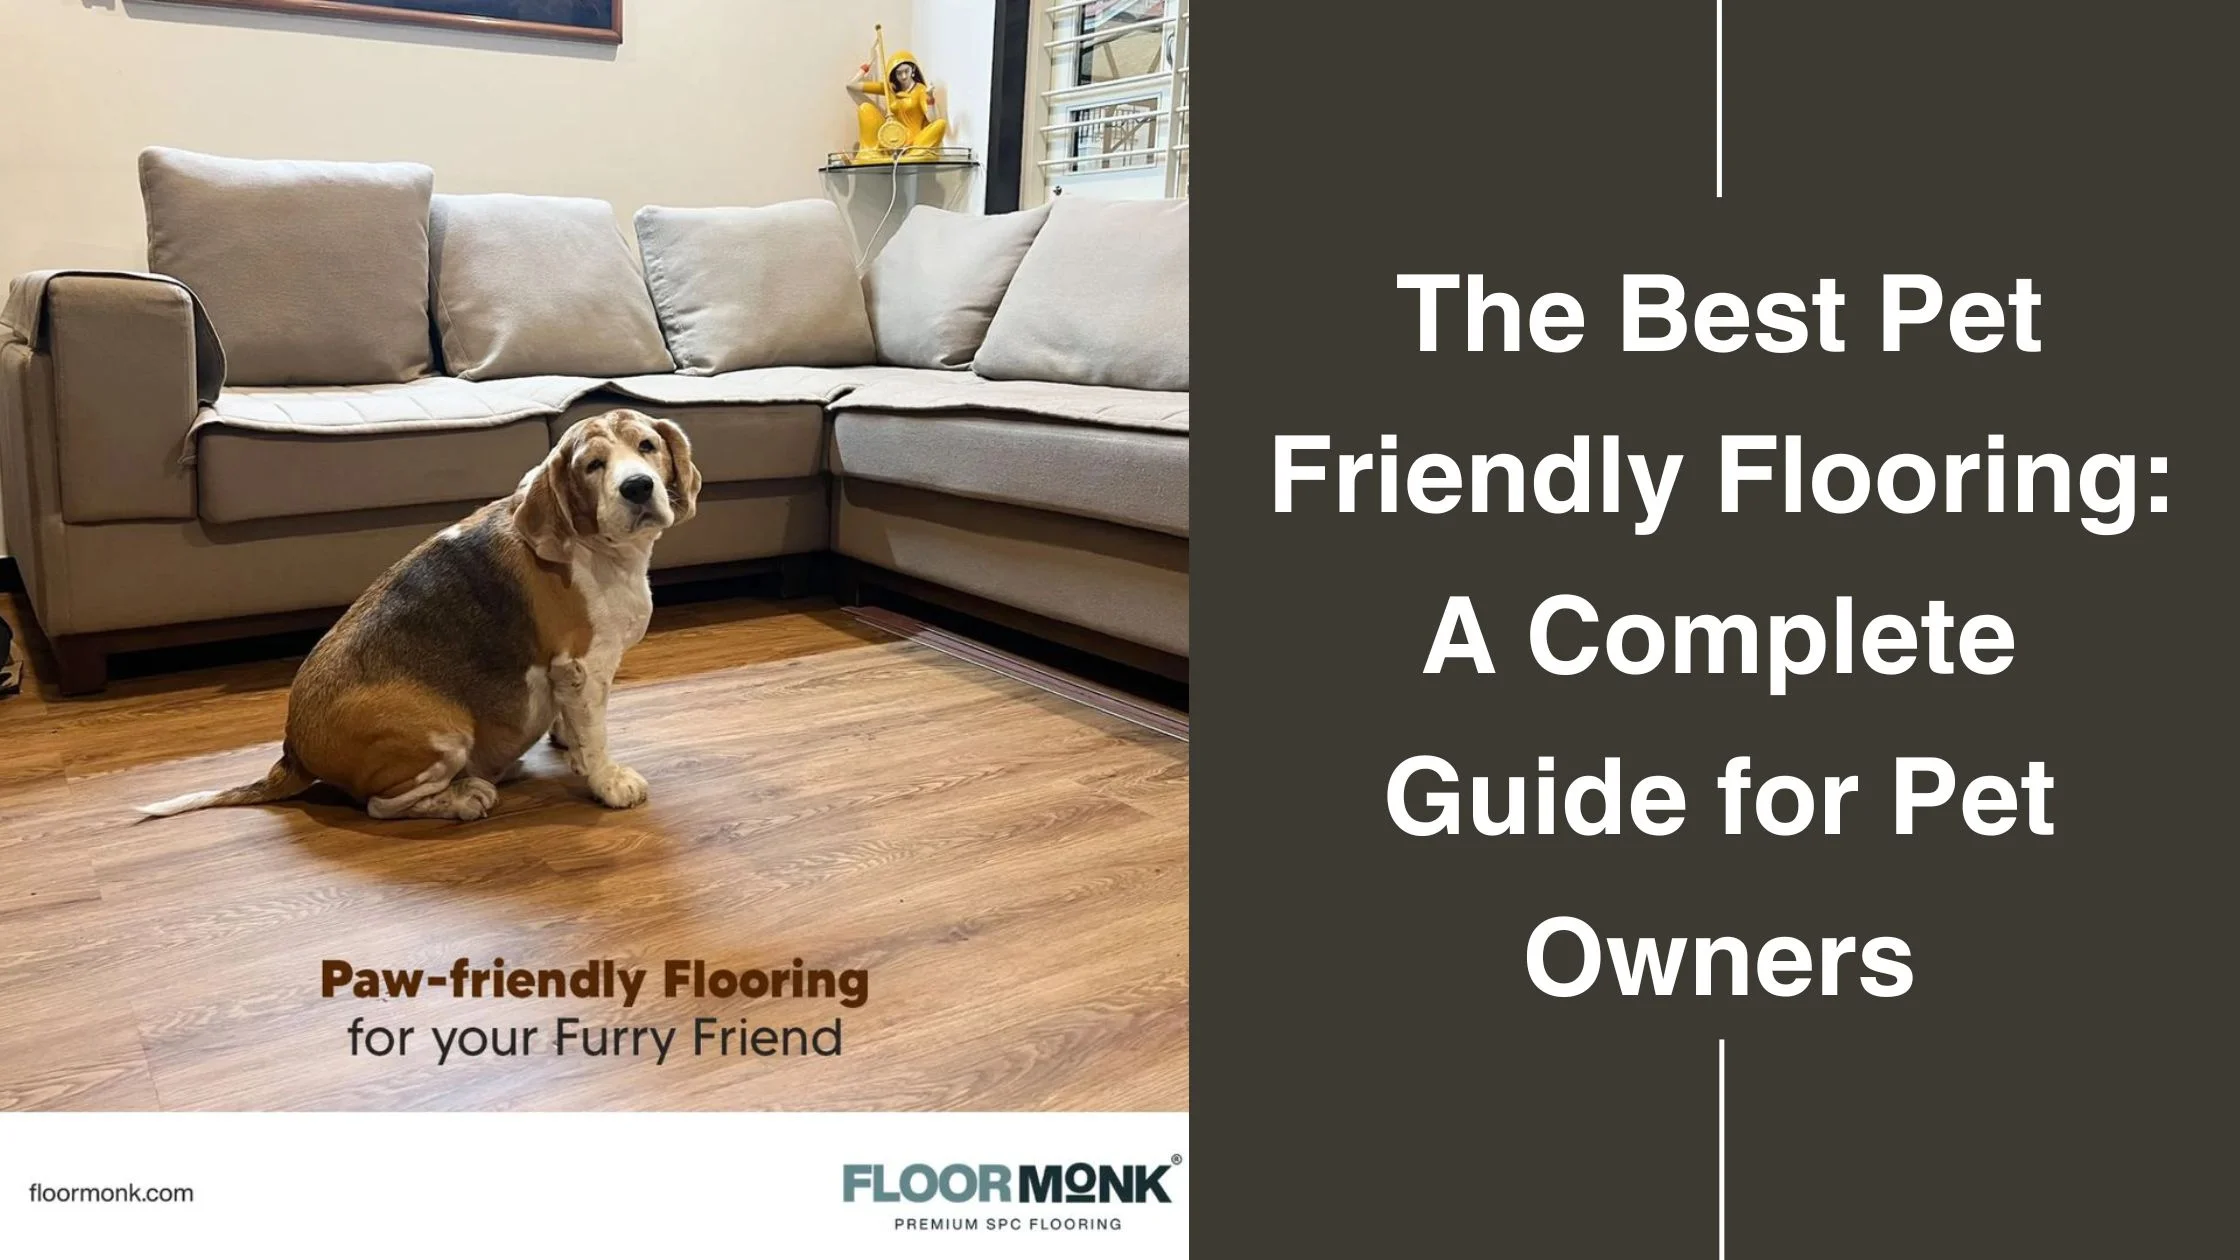 The Best Pet Friendly Flooring: A Complete Guide For Pet Owners